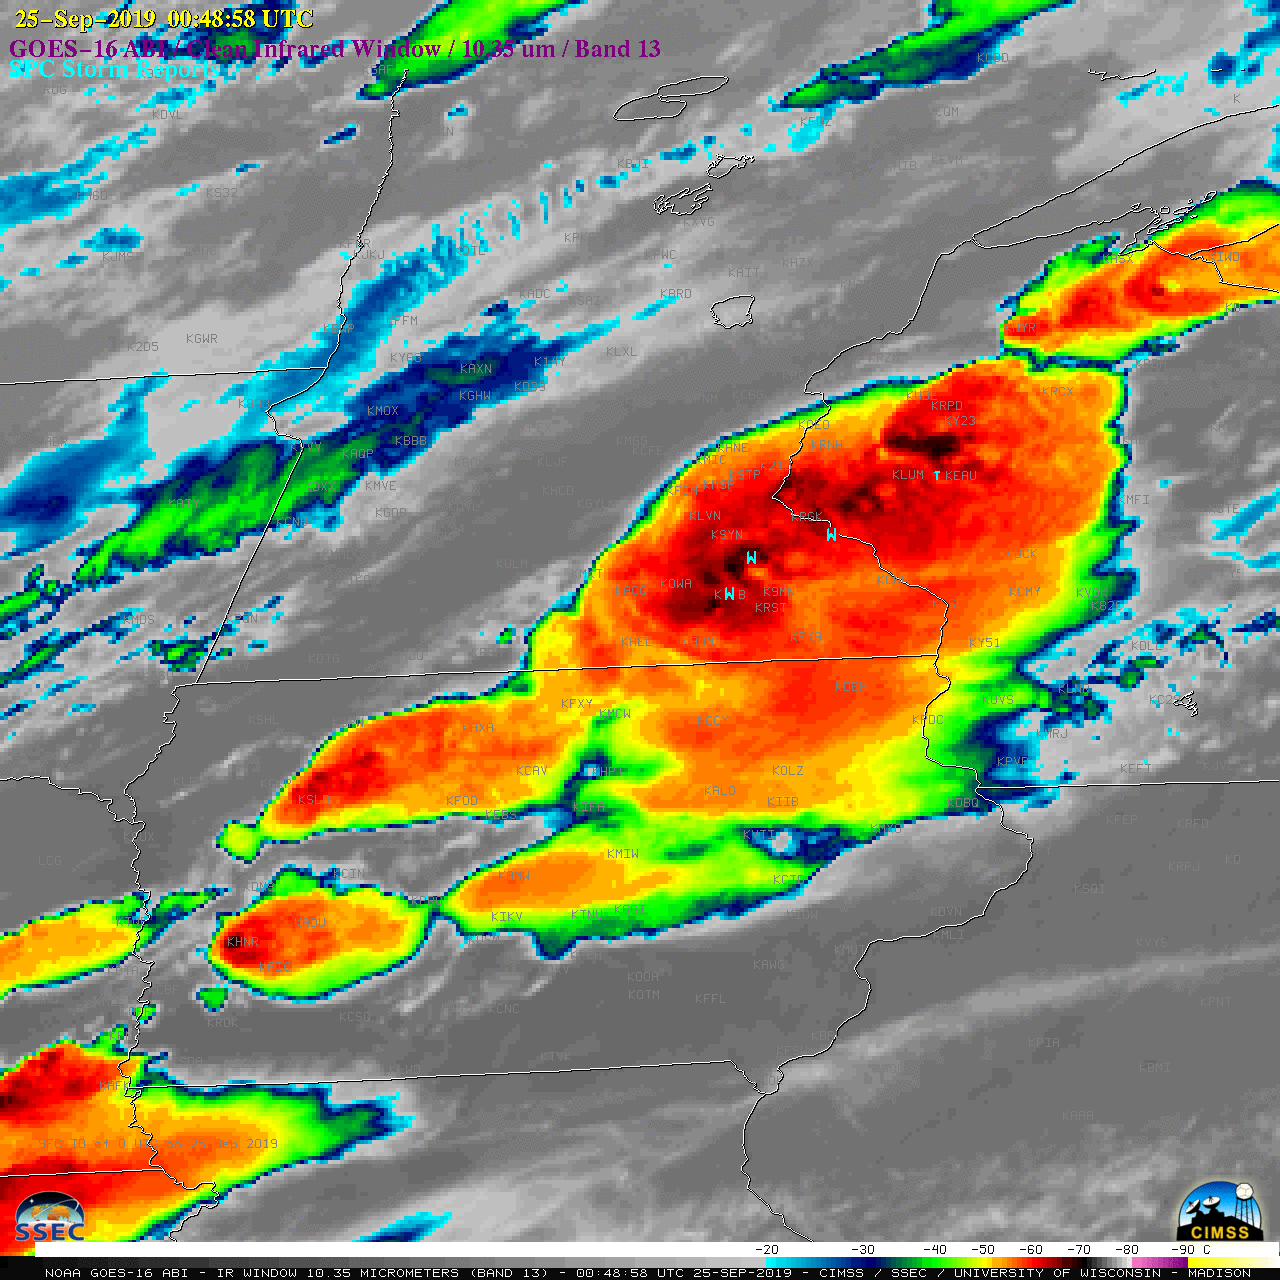 GOES-16 “Clean” Infrared Window (10.35 µm) images, with SPC Storm Reports plotted in cyan [click to play animation | MP4]